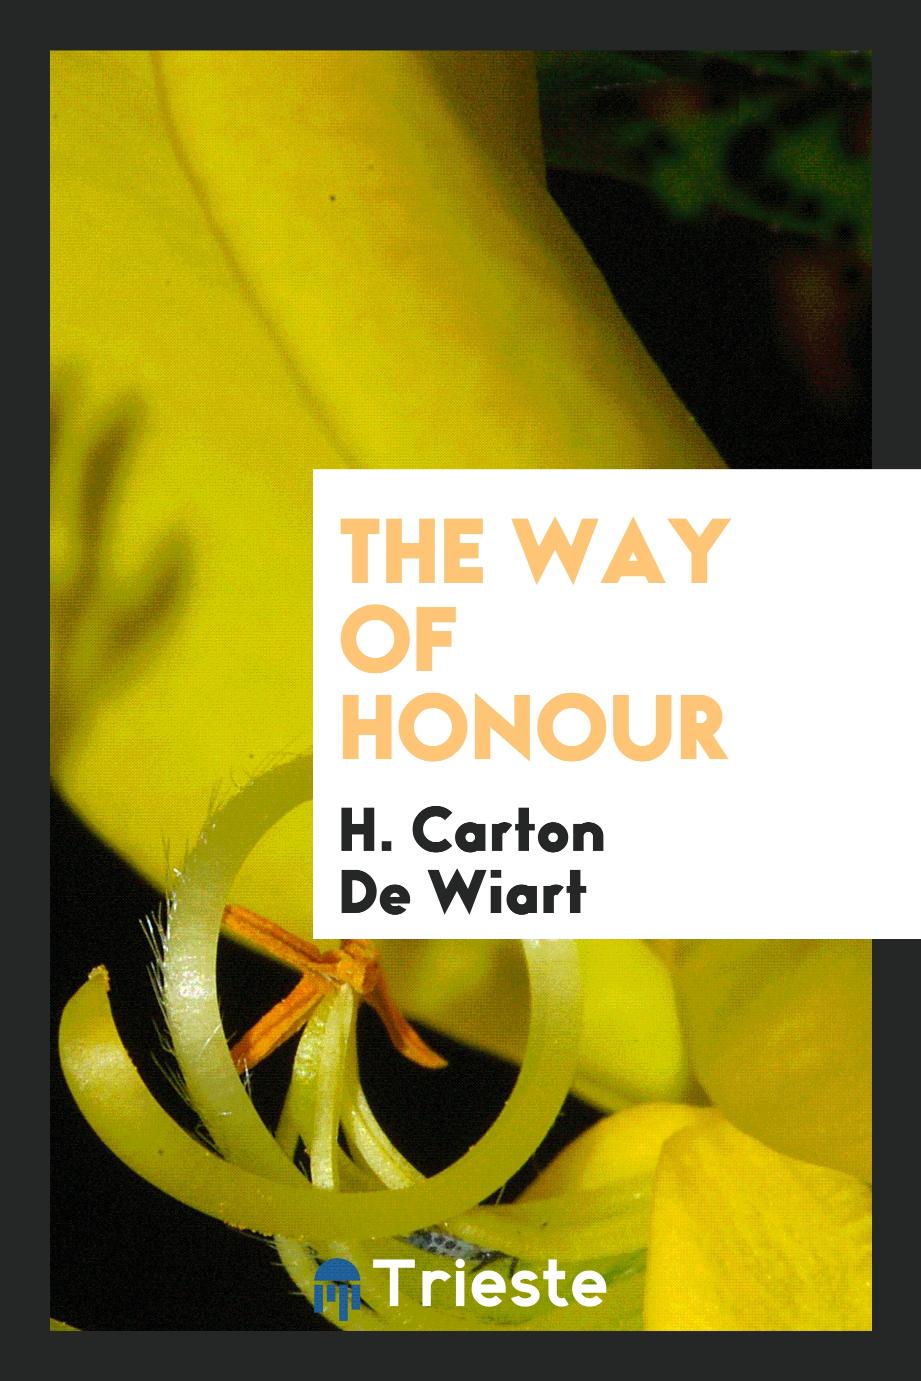 The way of honour